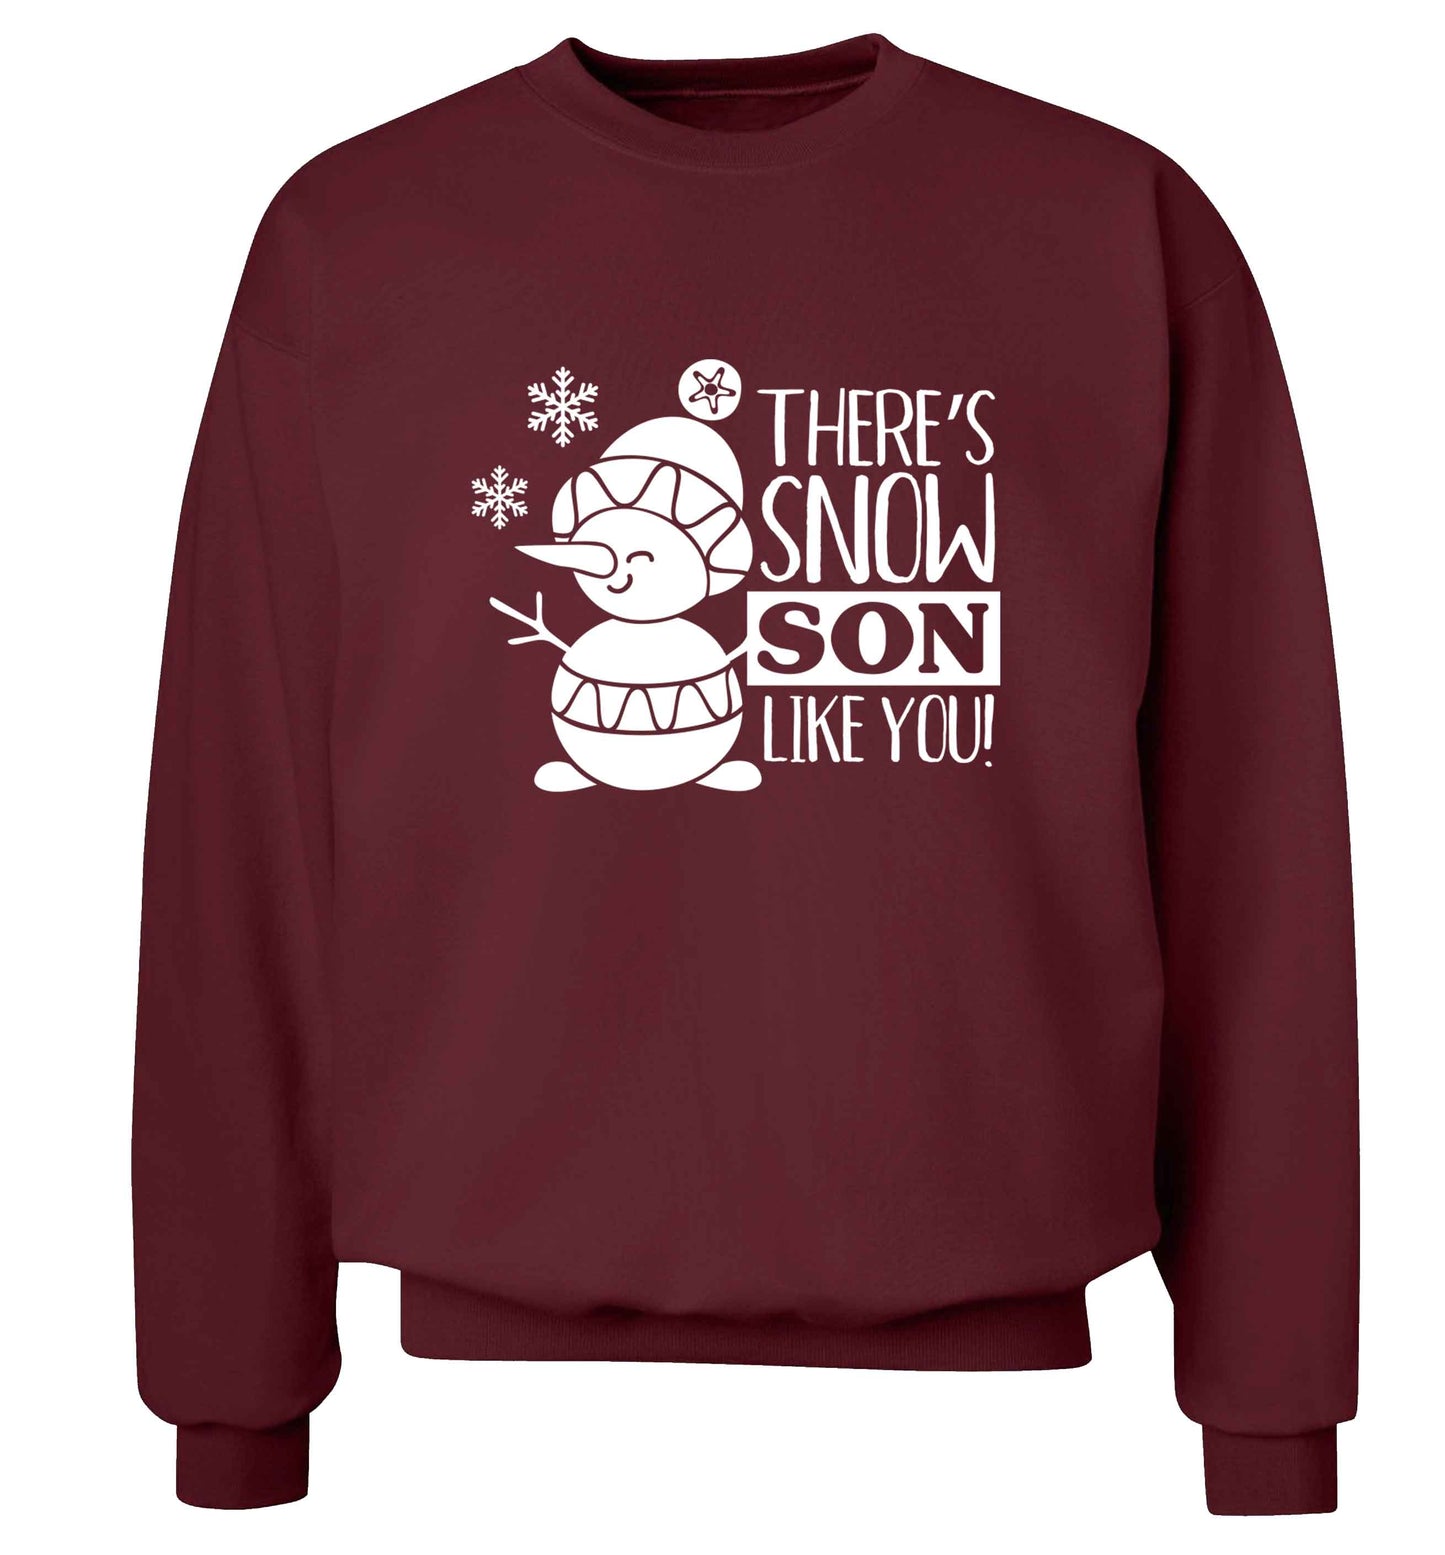 There's snow son like you adult's unisex maroon sweater 2XL